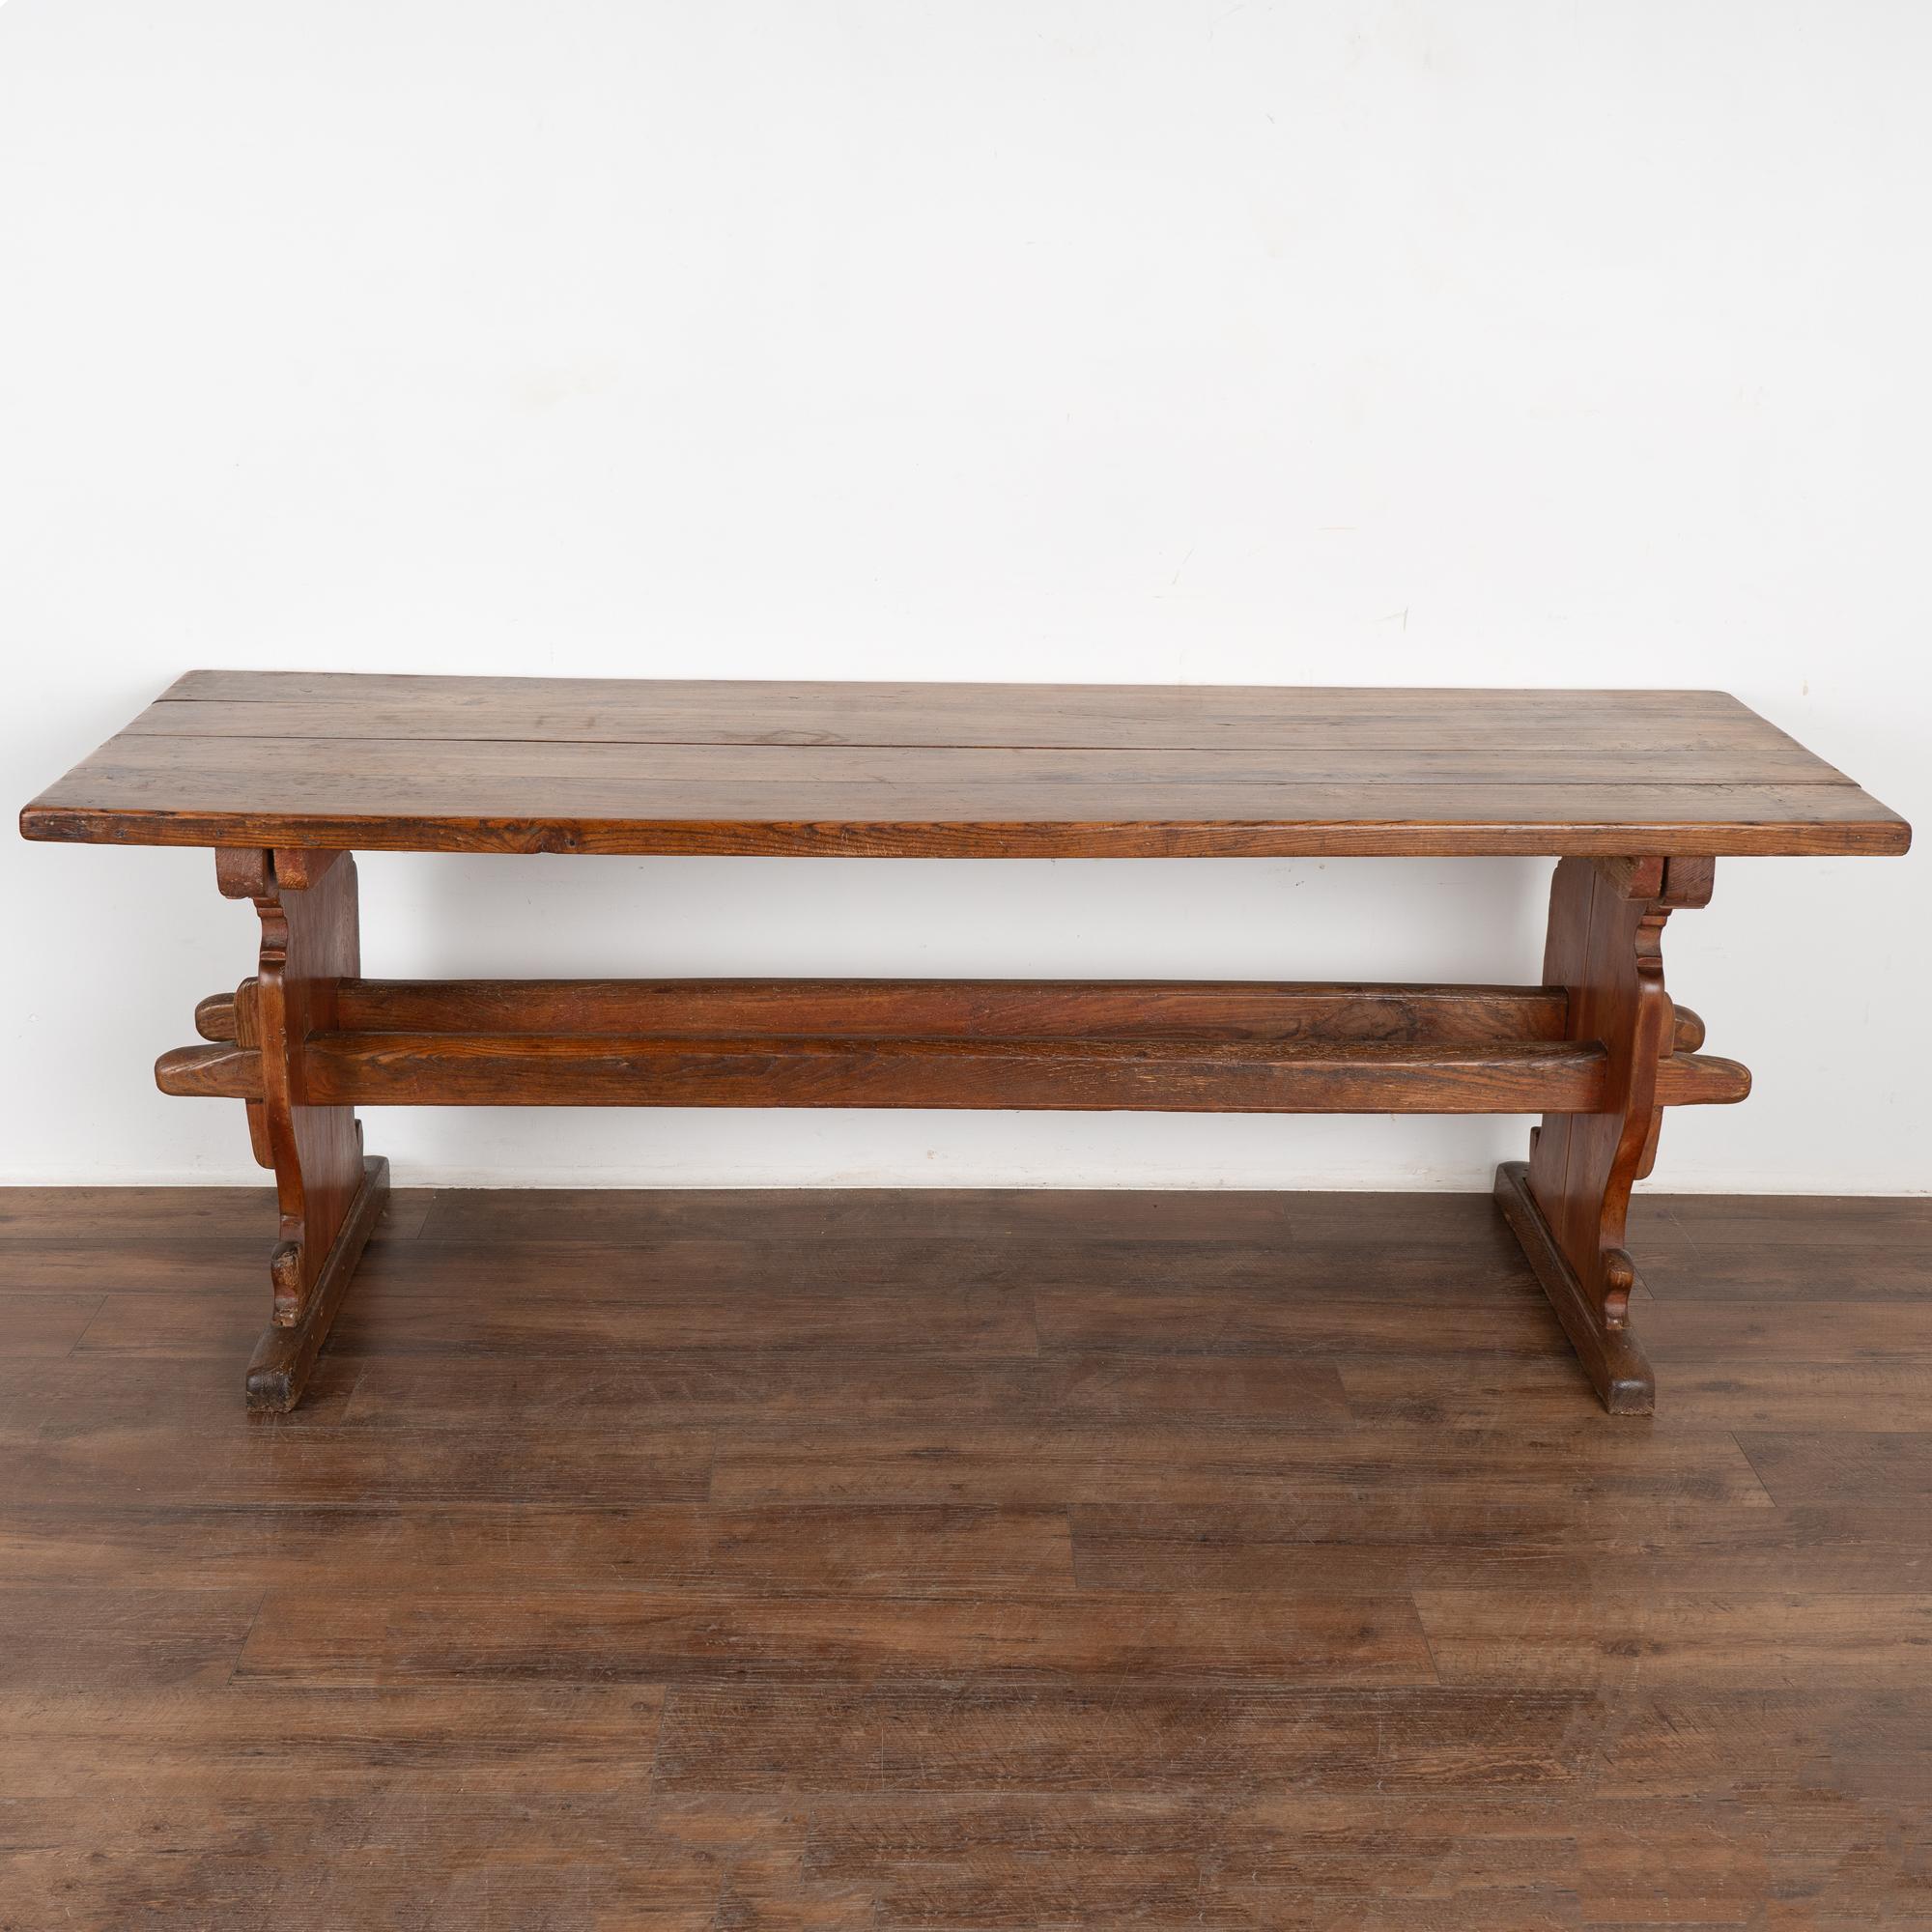 Country Farm Dining Kitchen Table With Trestle Base, Denmark circa 1820-40 For Sale